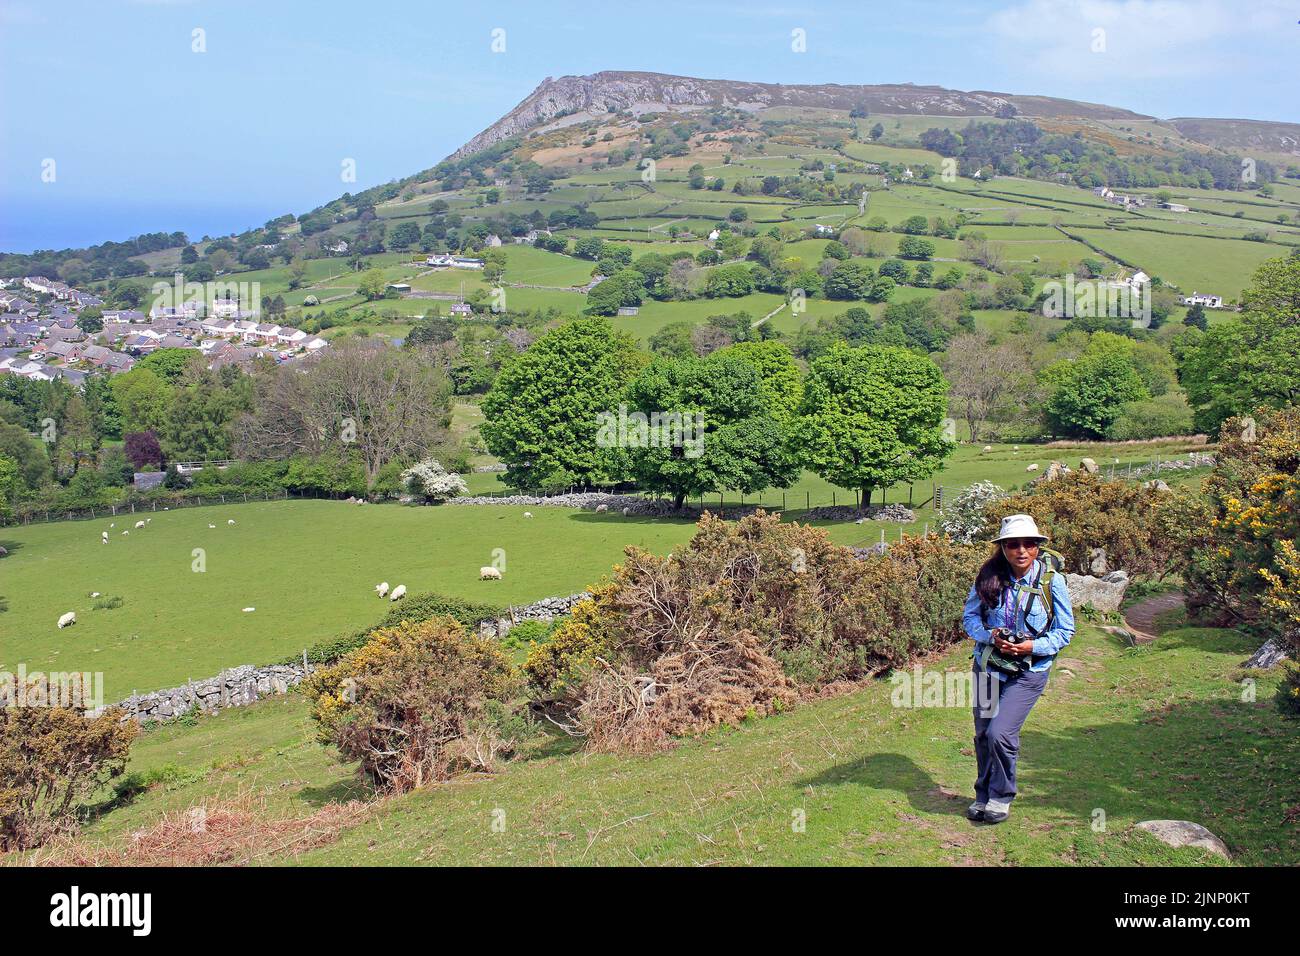 Indian Woman Walking With Llanfairfechan and Penmaenmawr Mountain in distance, Wales, UK Stock Photo